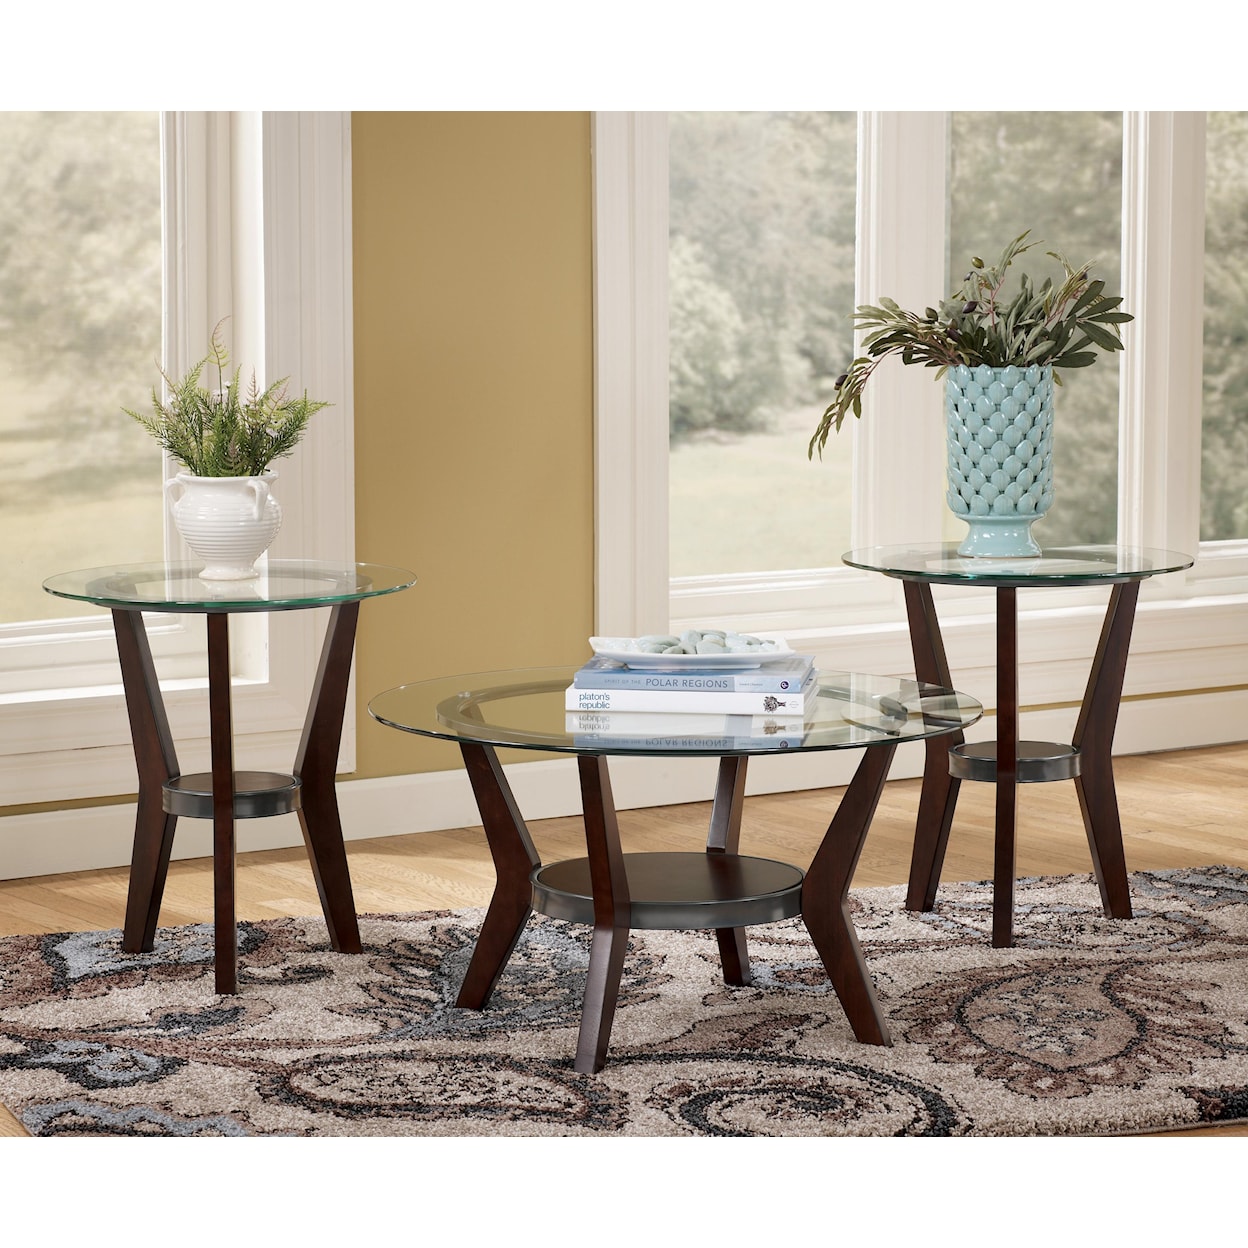 Ashley Furniture Signature Design Fantell 3-in-1 Group Occasional Tables